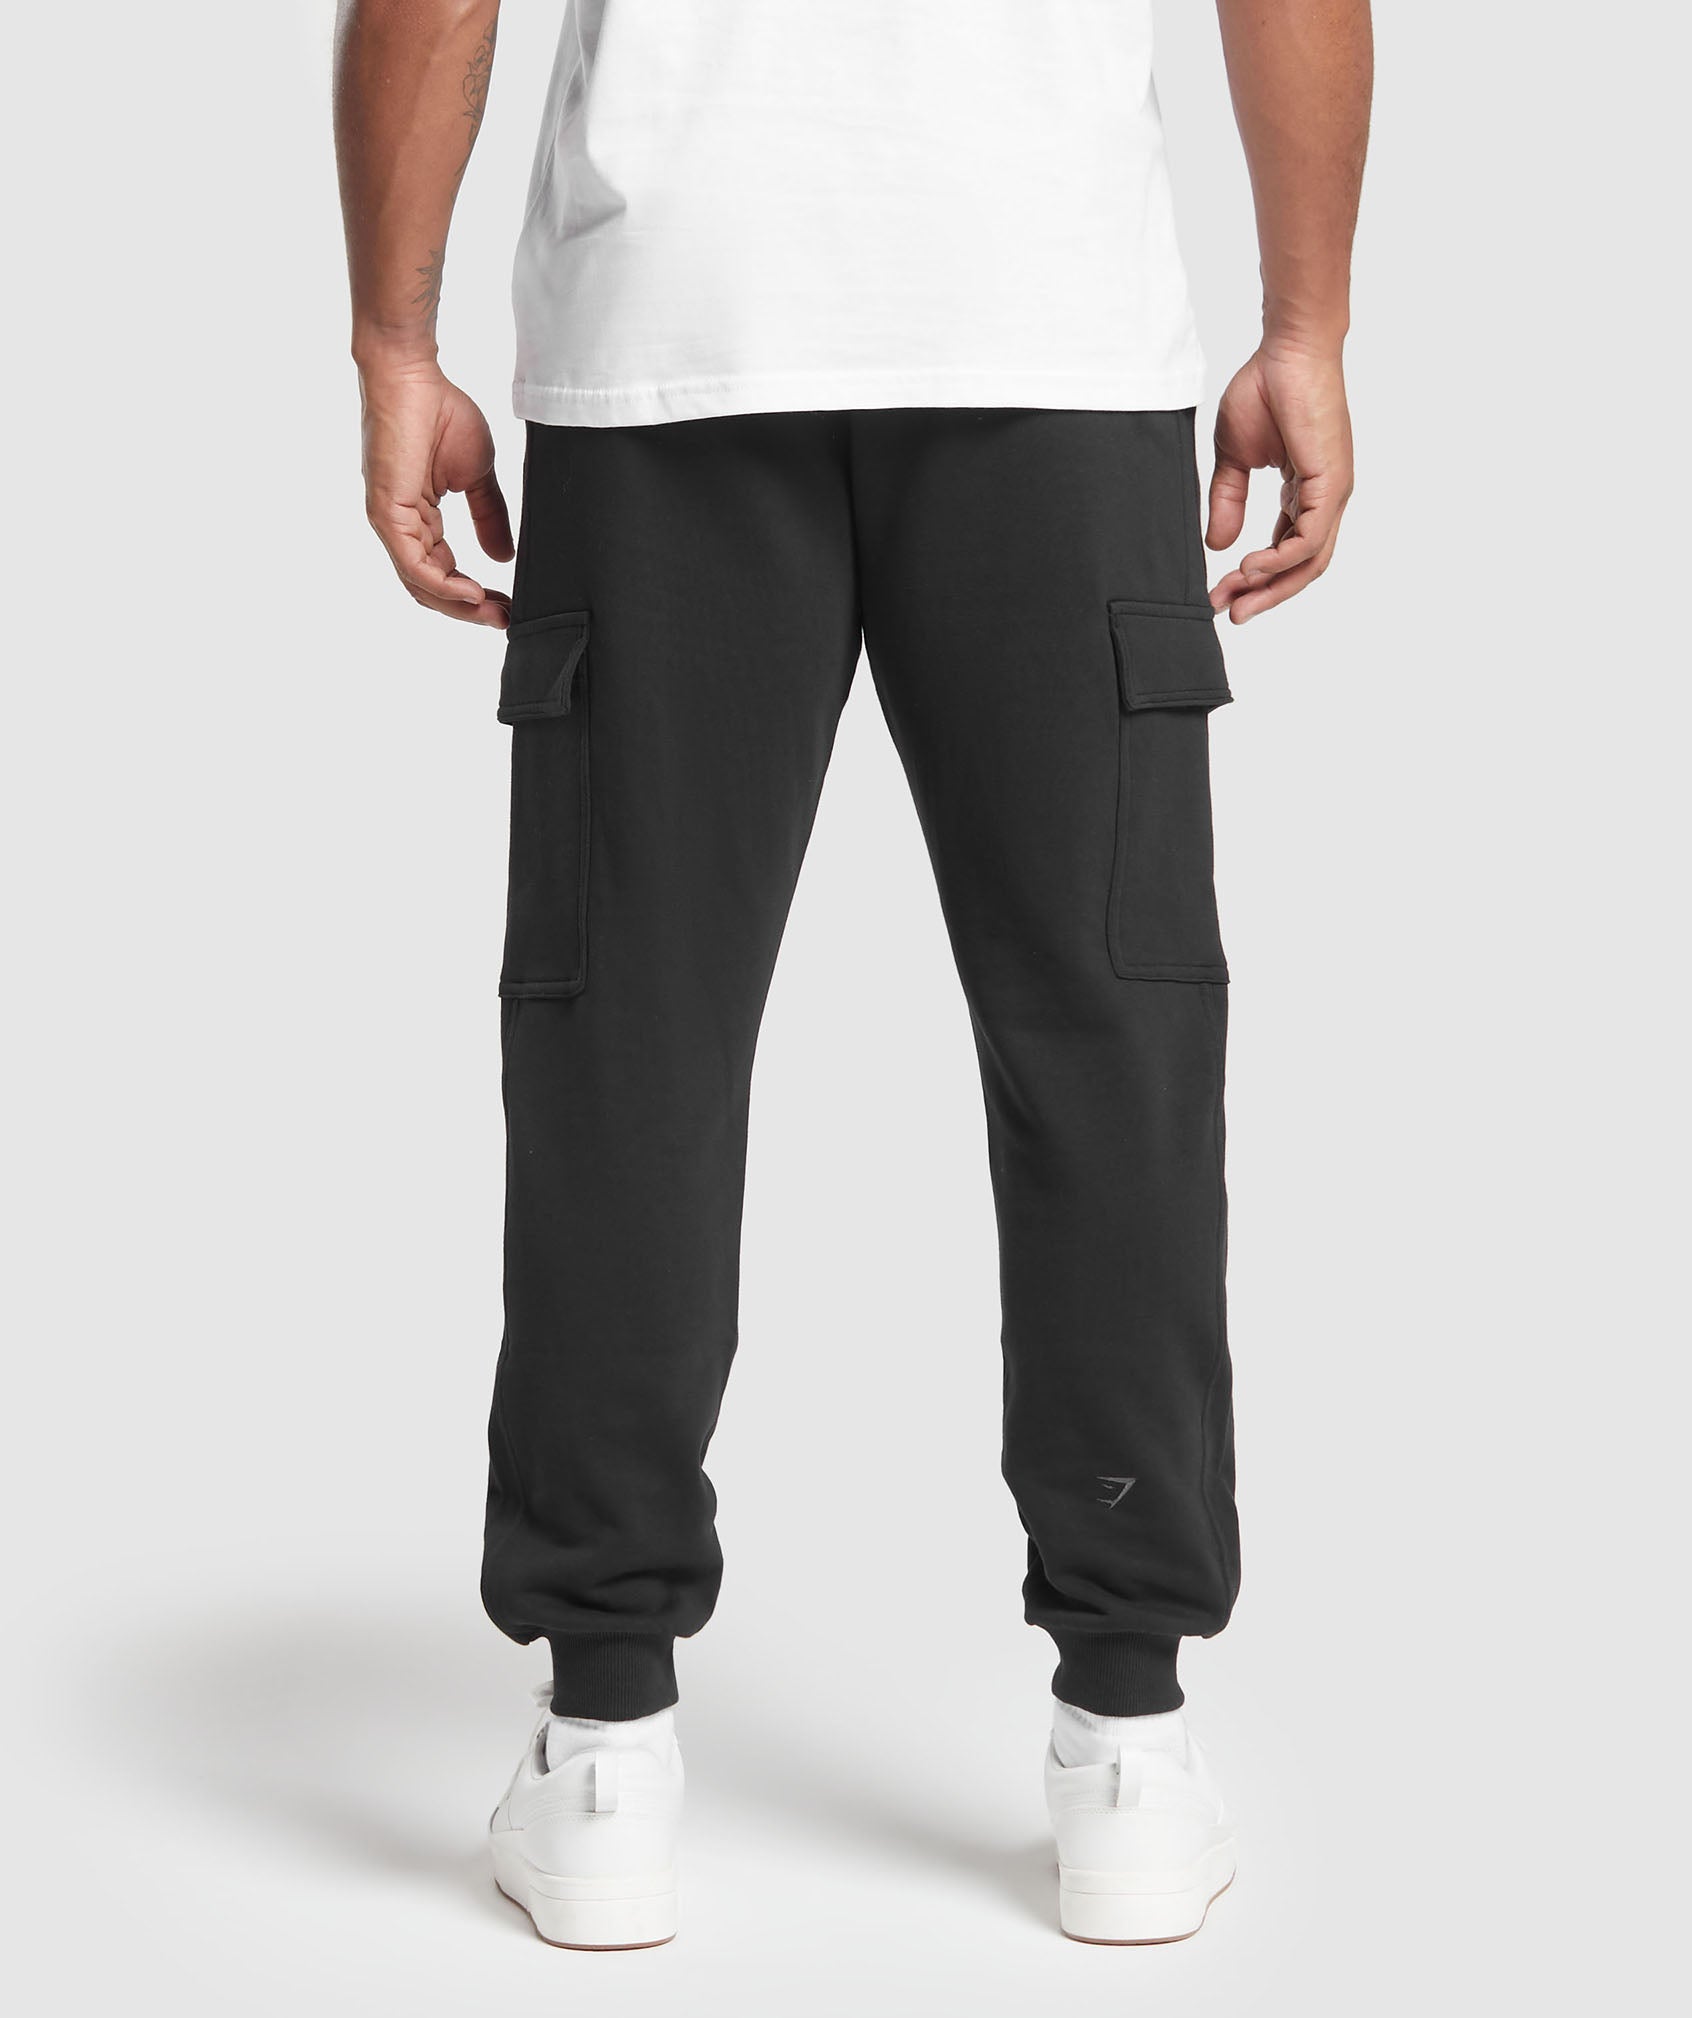 Rest Day Essentials Cargo Joggers in Black - view 3